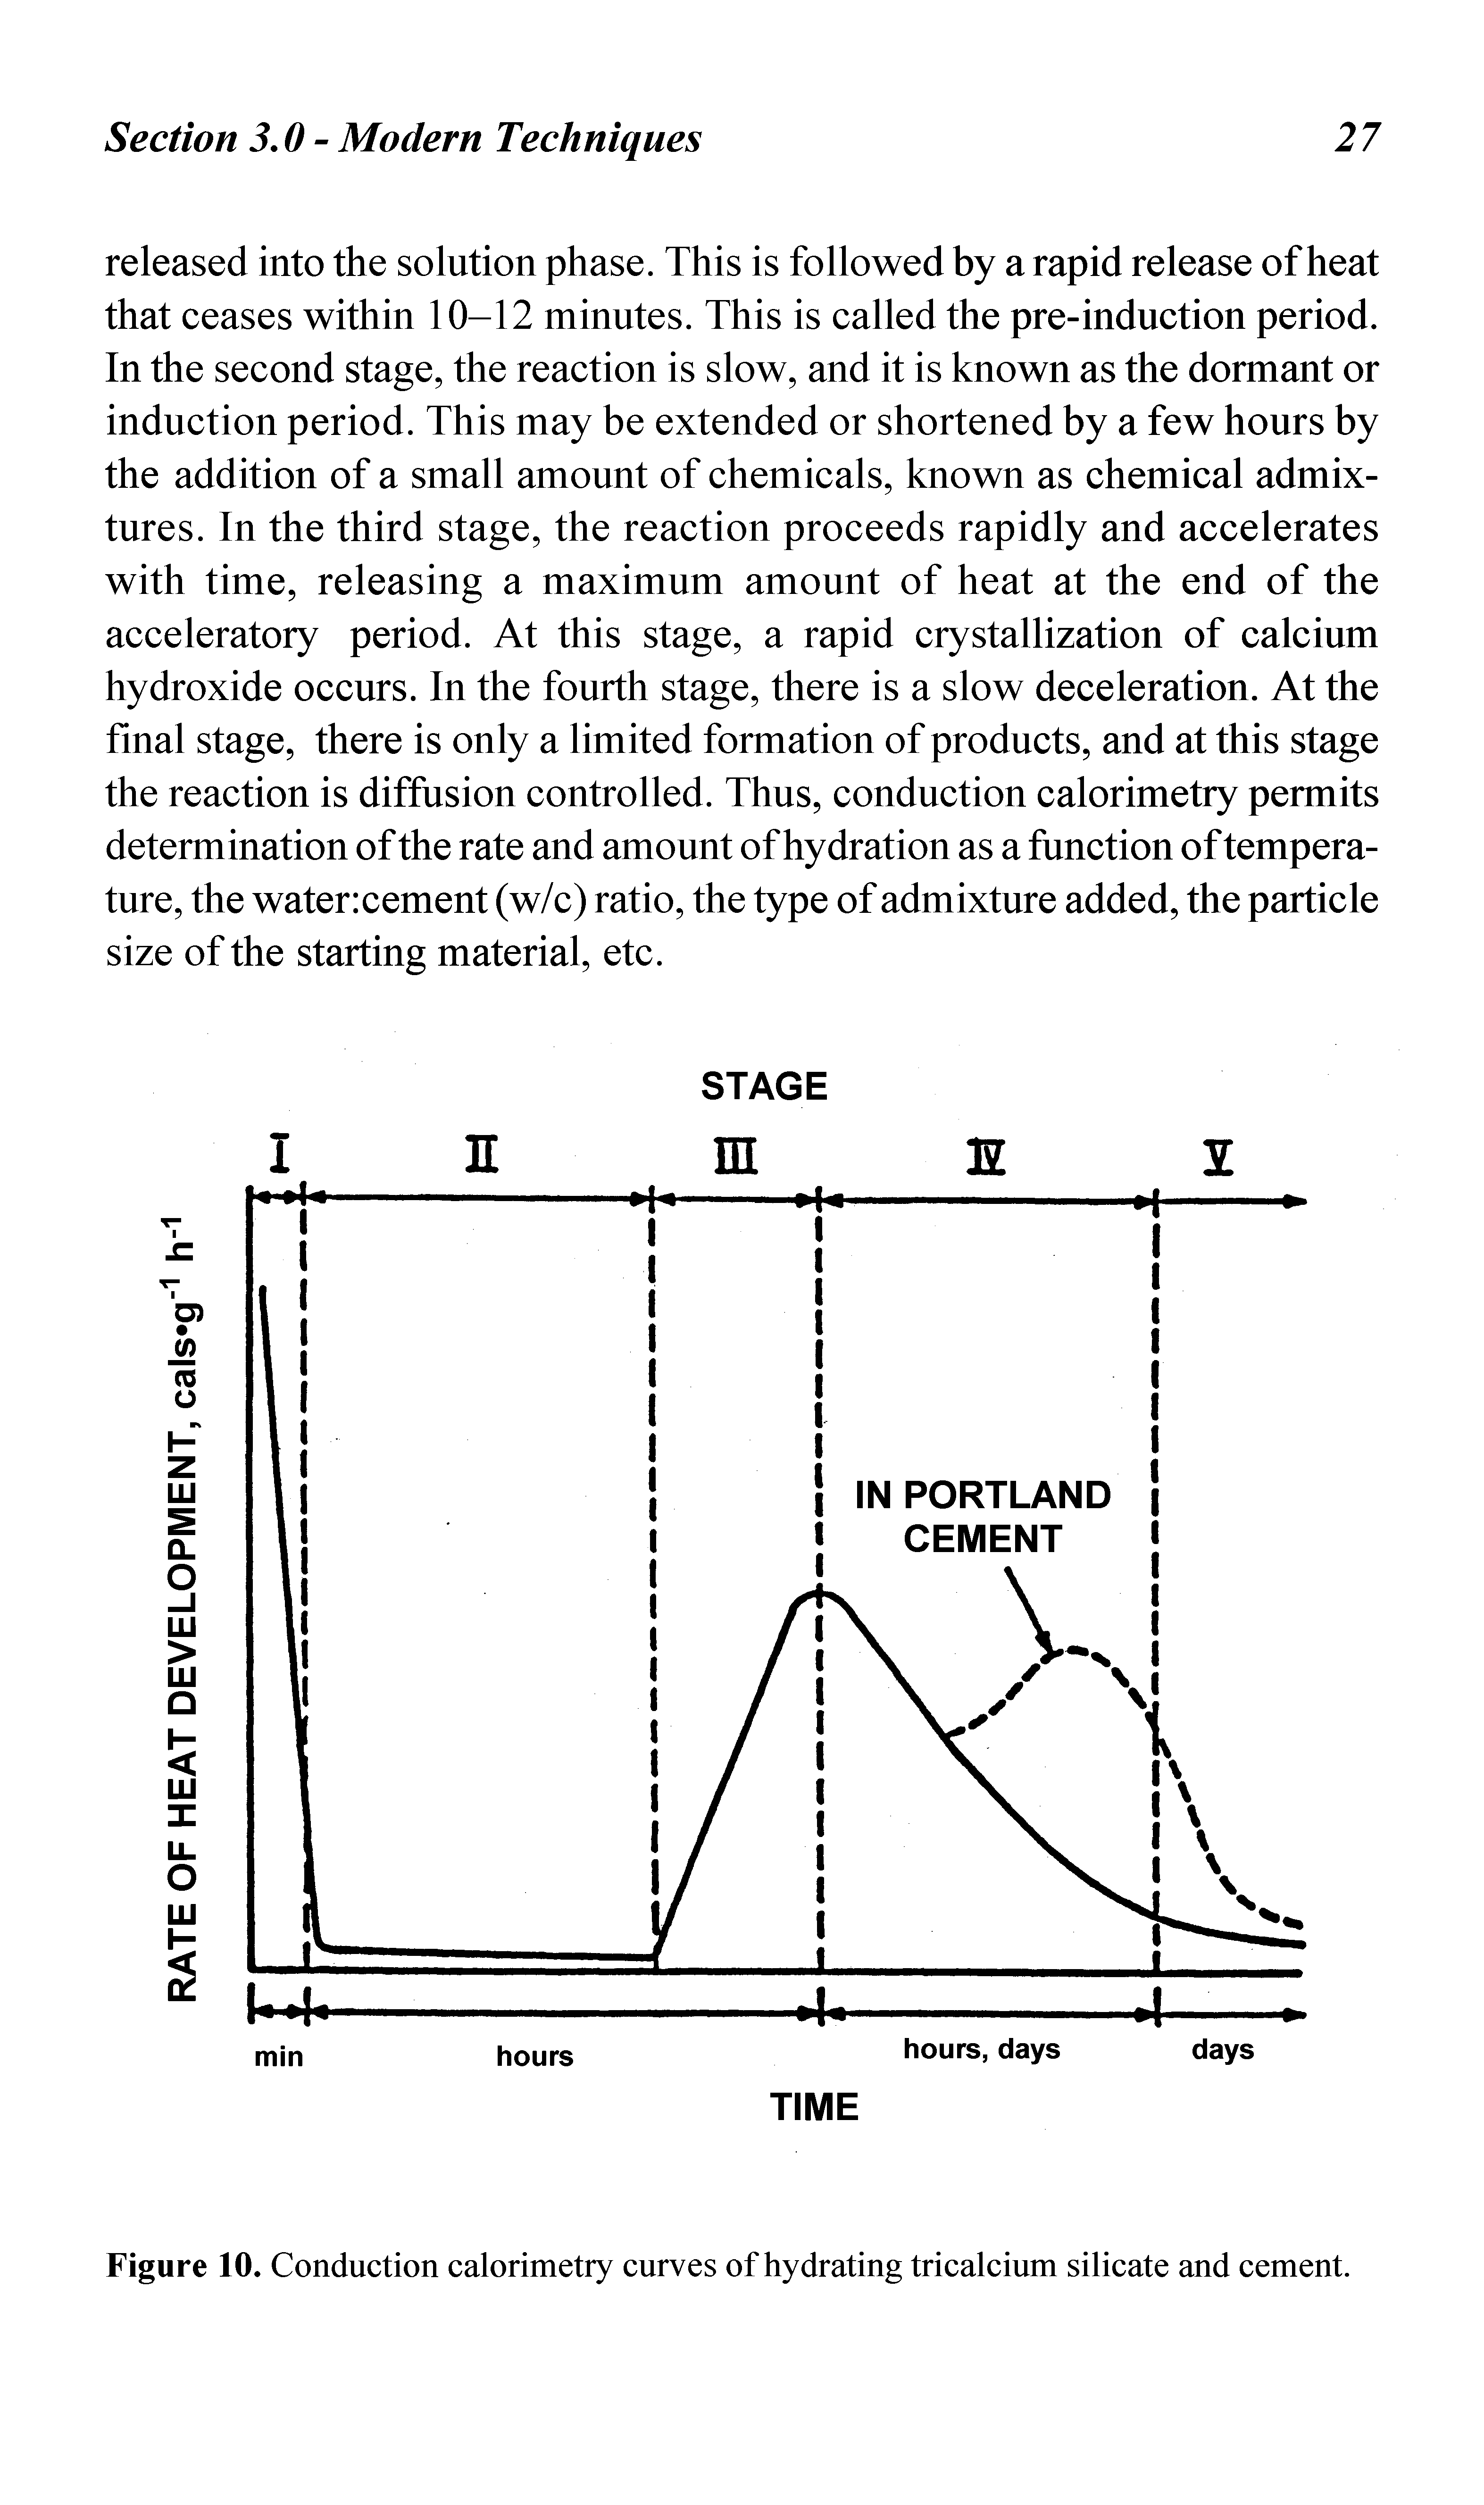 Figure 10. Conduction calorimetry curves of hydrating tricaleium silicate and cement.